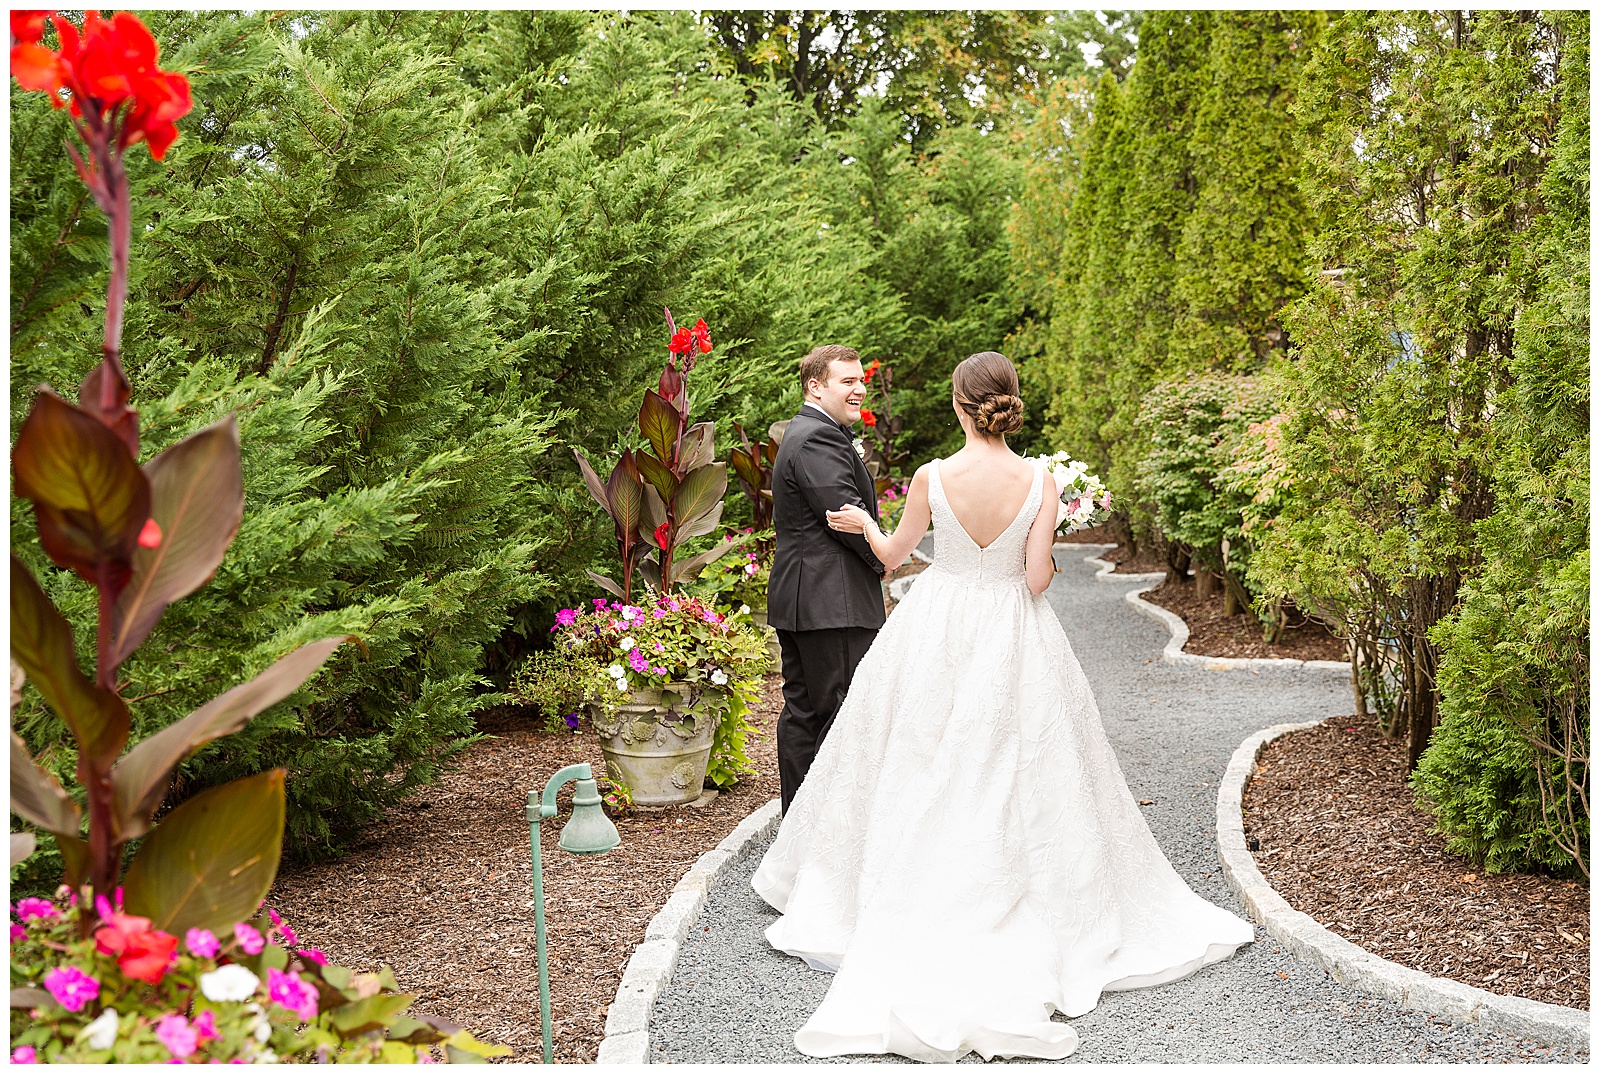 First look moment in the gardens at the Chanler